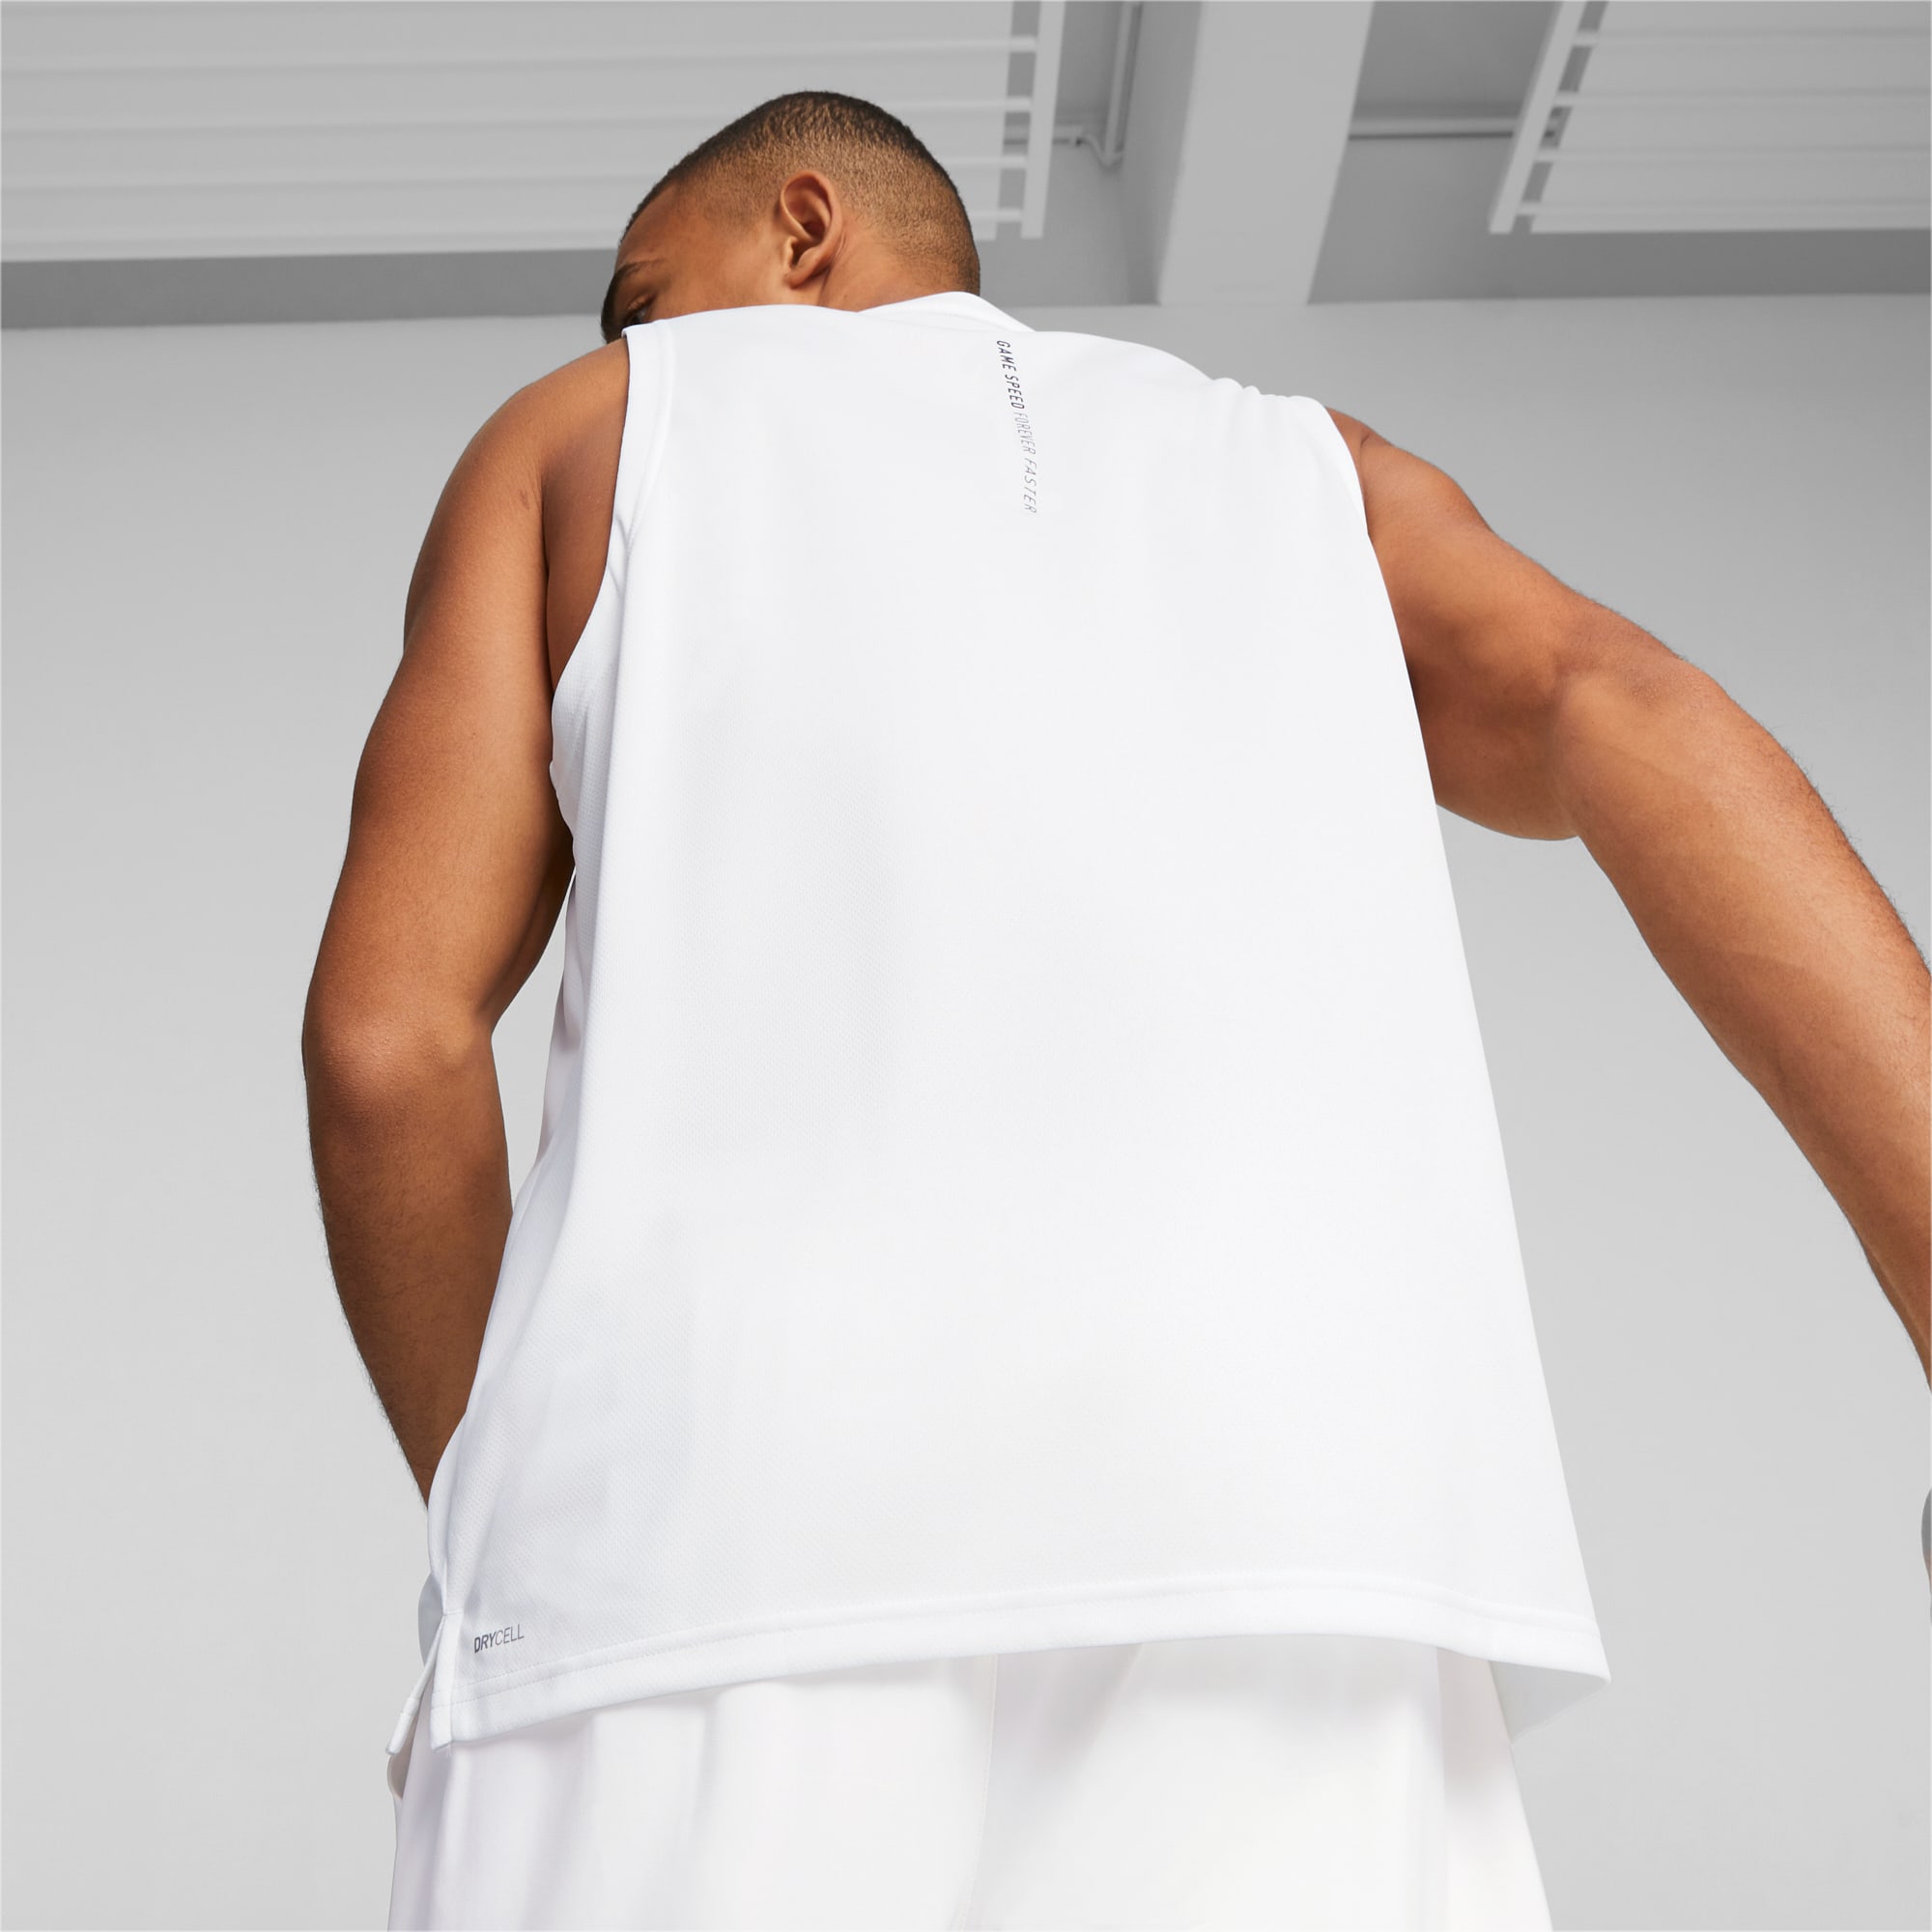 Basketball Firm Tank Activewear Tops for Men for Sale